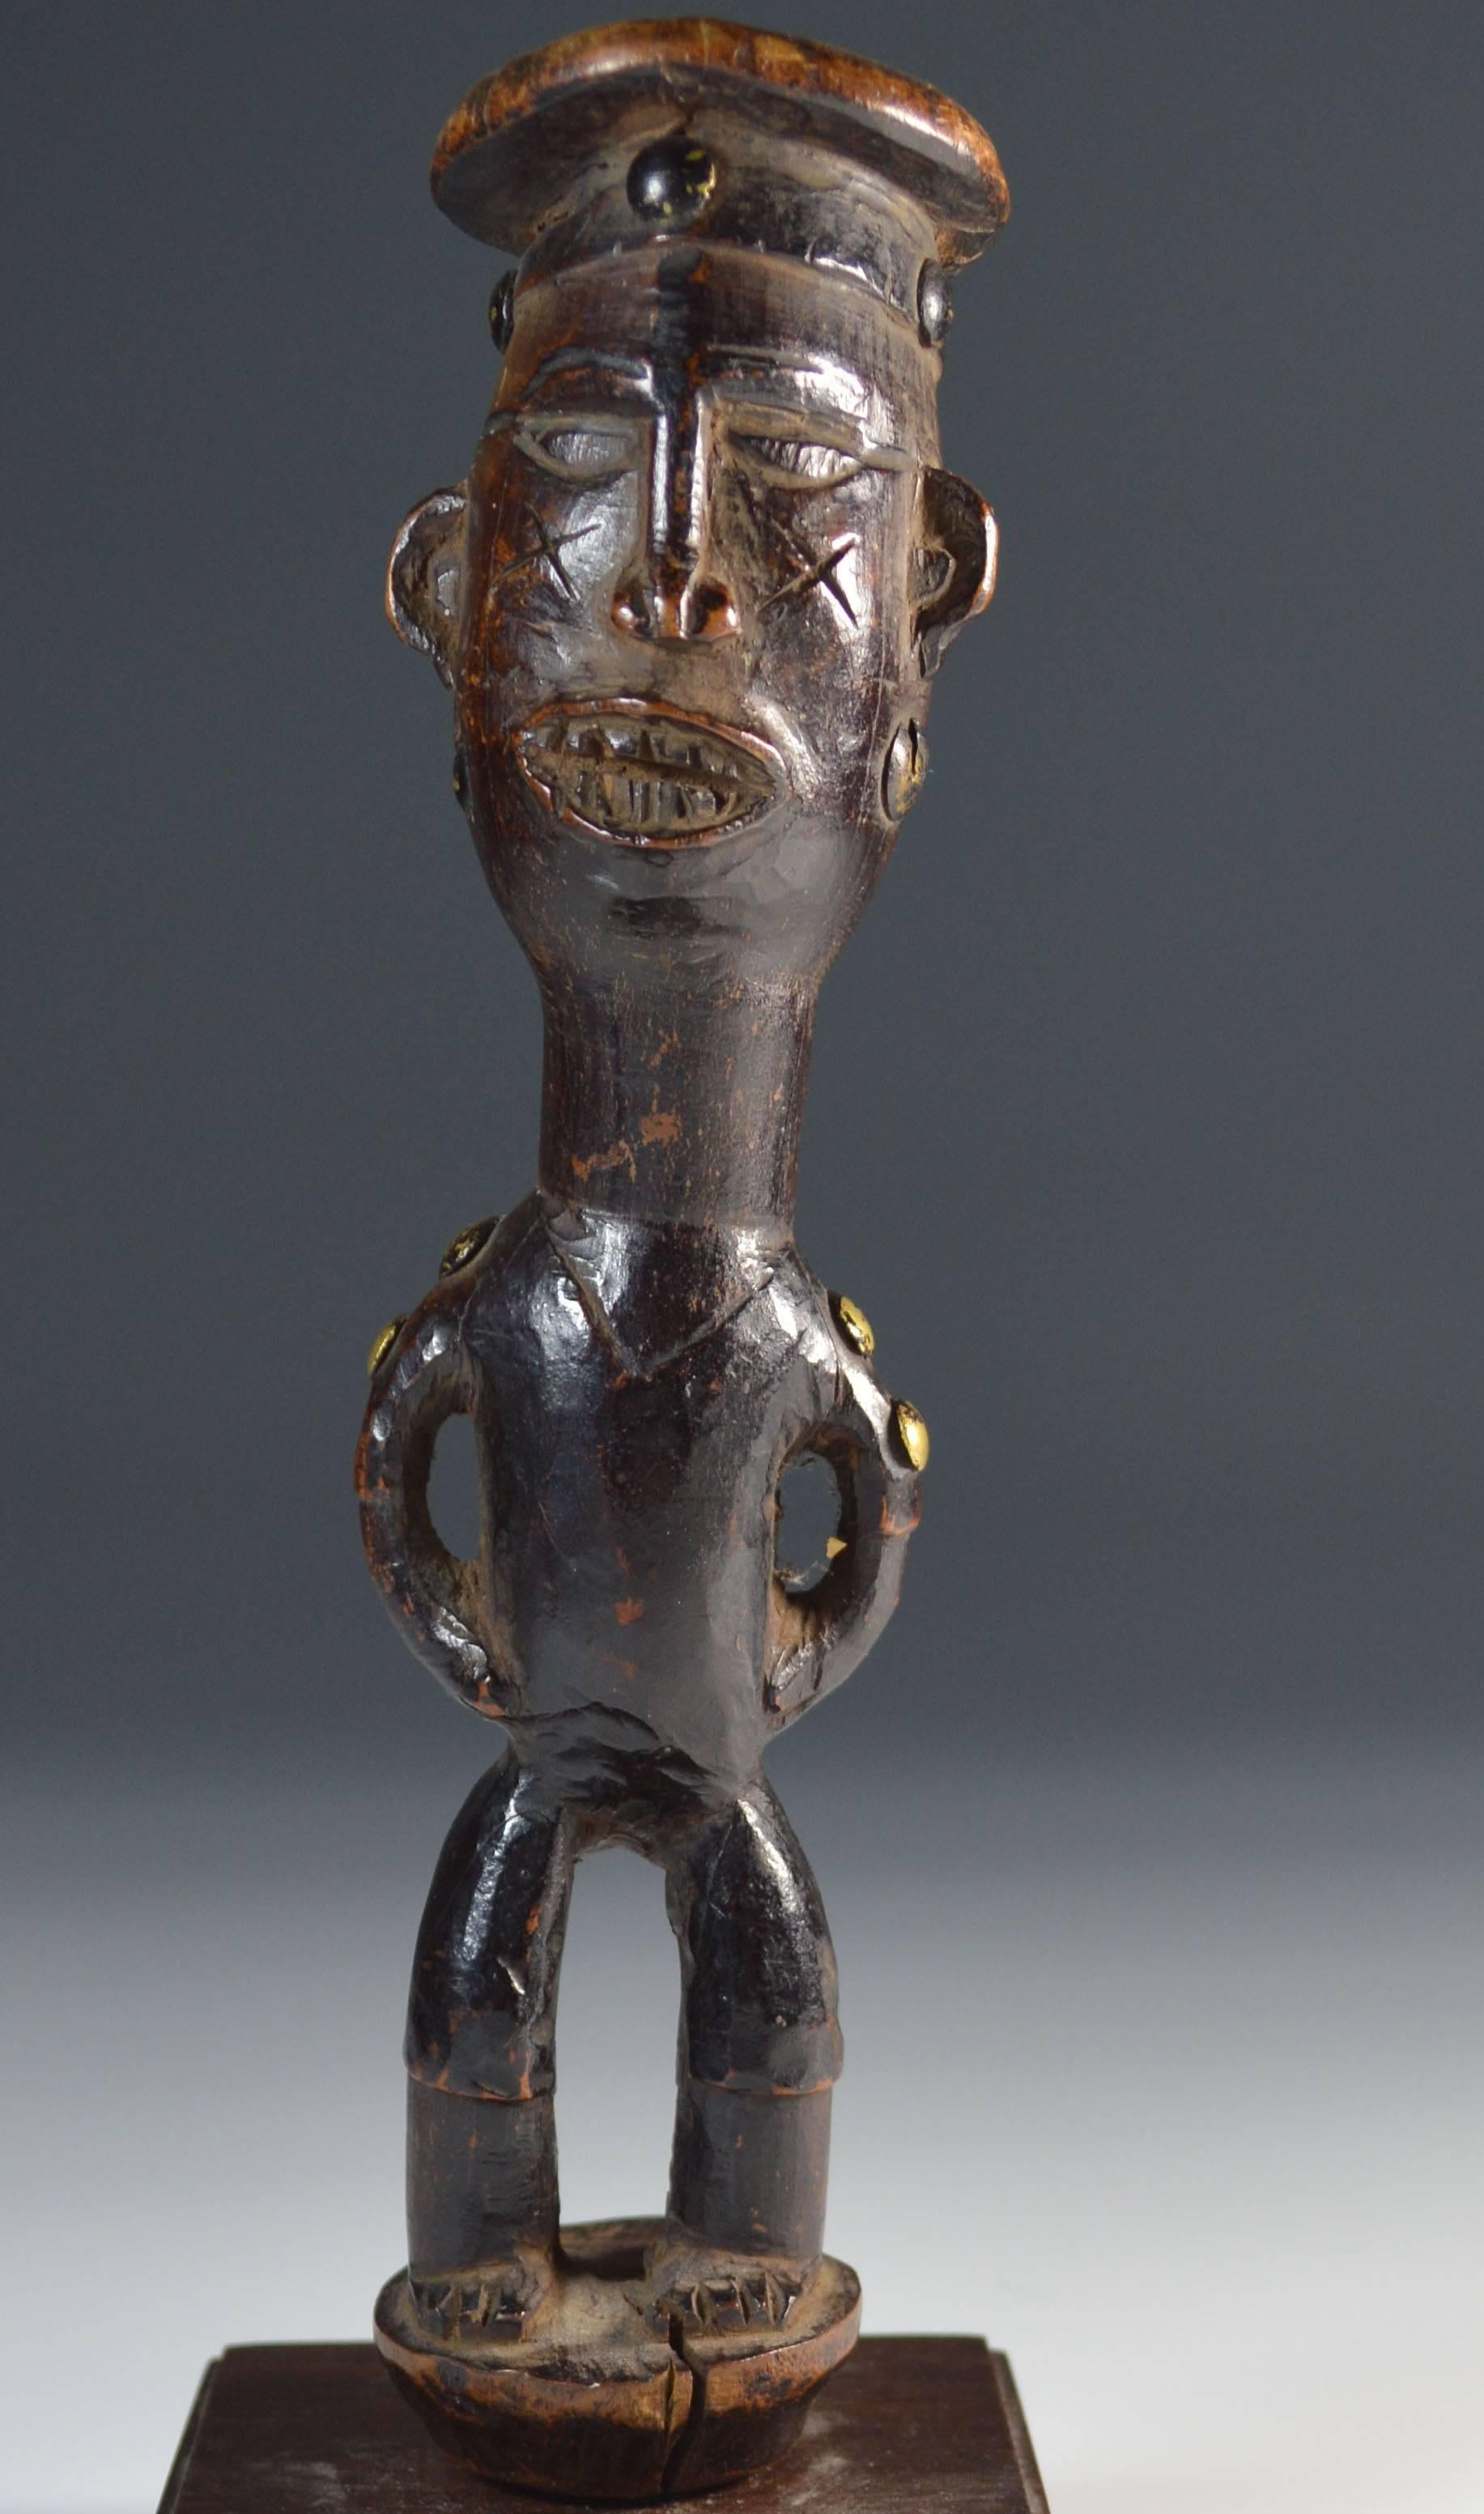 African tribal BaCongo Bakongo colonial staff head
A 19th century BaCongo colonial staff or fly whisk head. Depicting a African caricature of a Colonial captain or Official
Deep matured aged patina
Measures: Height 20 cm, 8 inches.
Provenance: